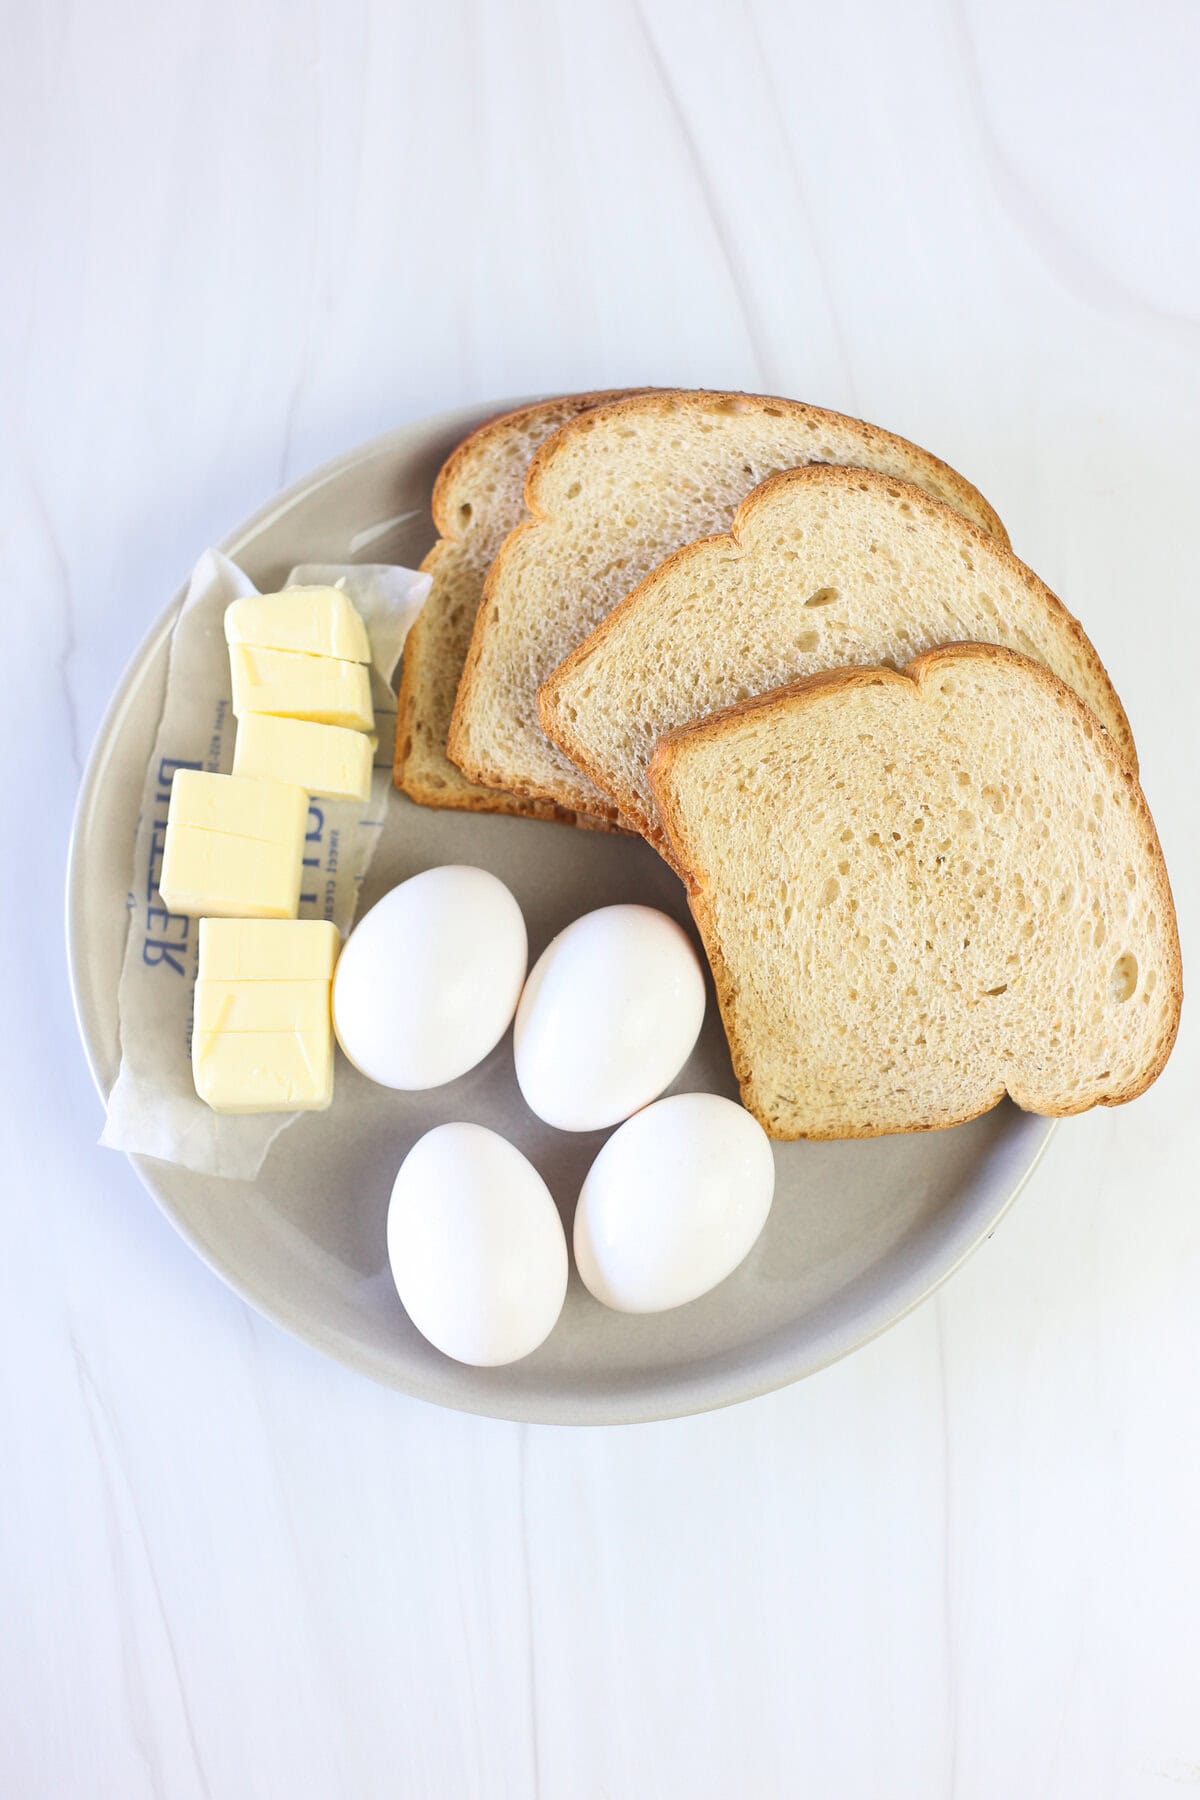 Bread, eggs, and butter on a plate. 